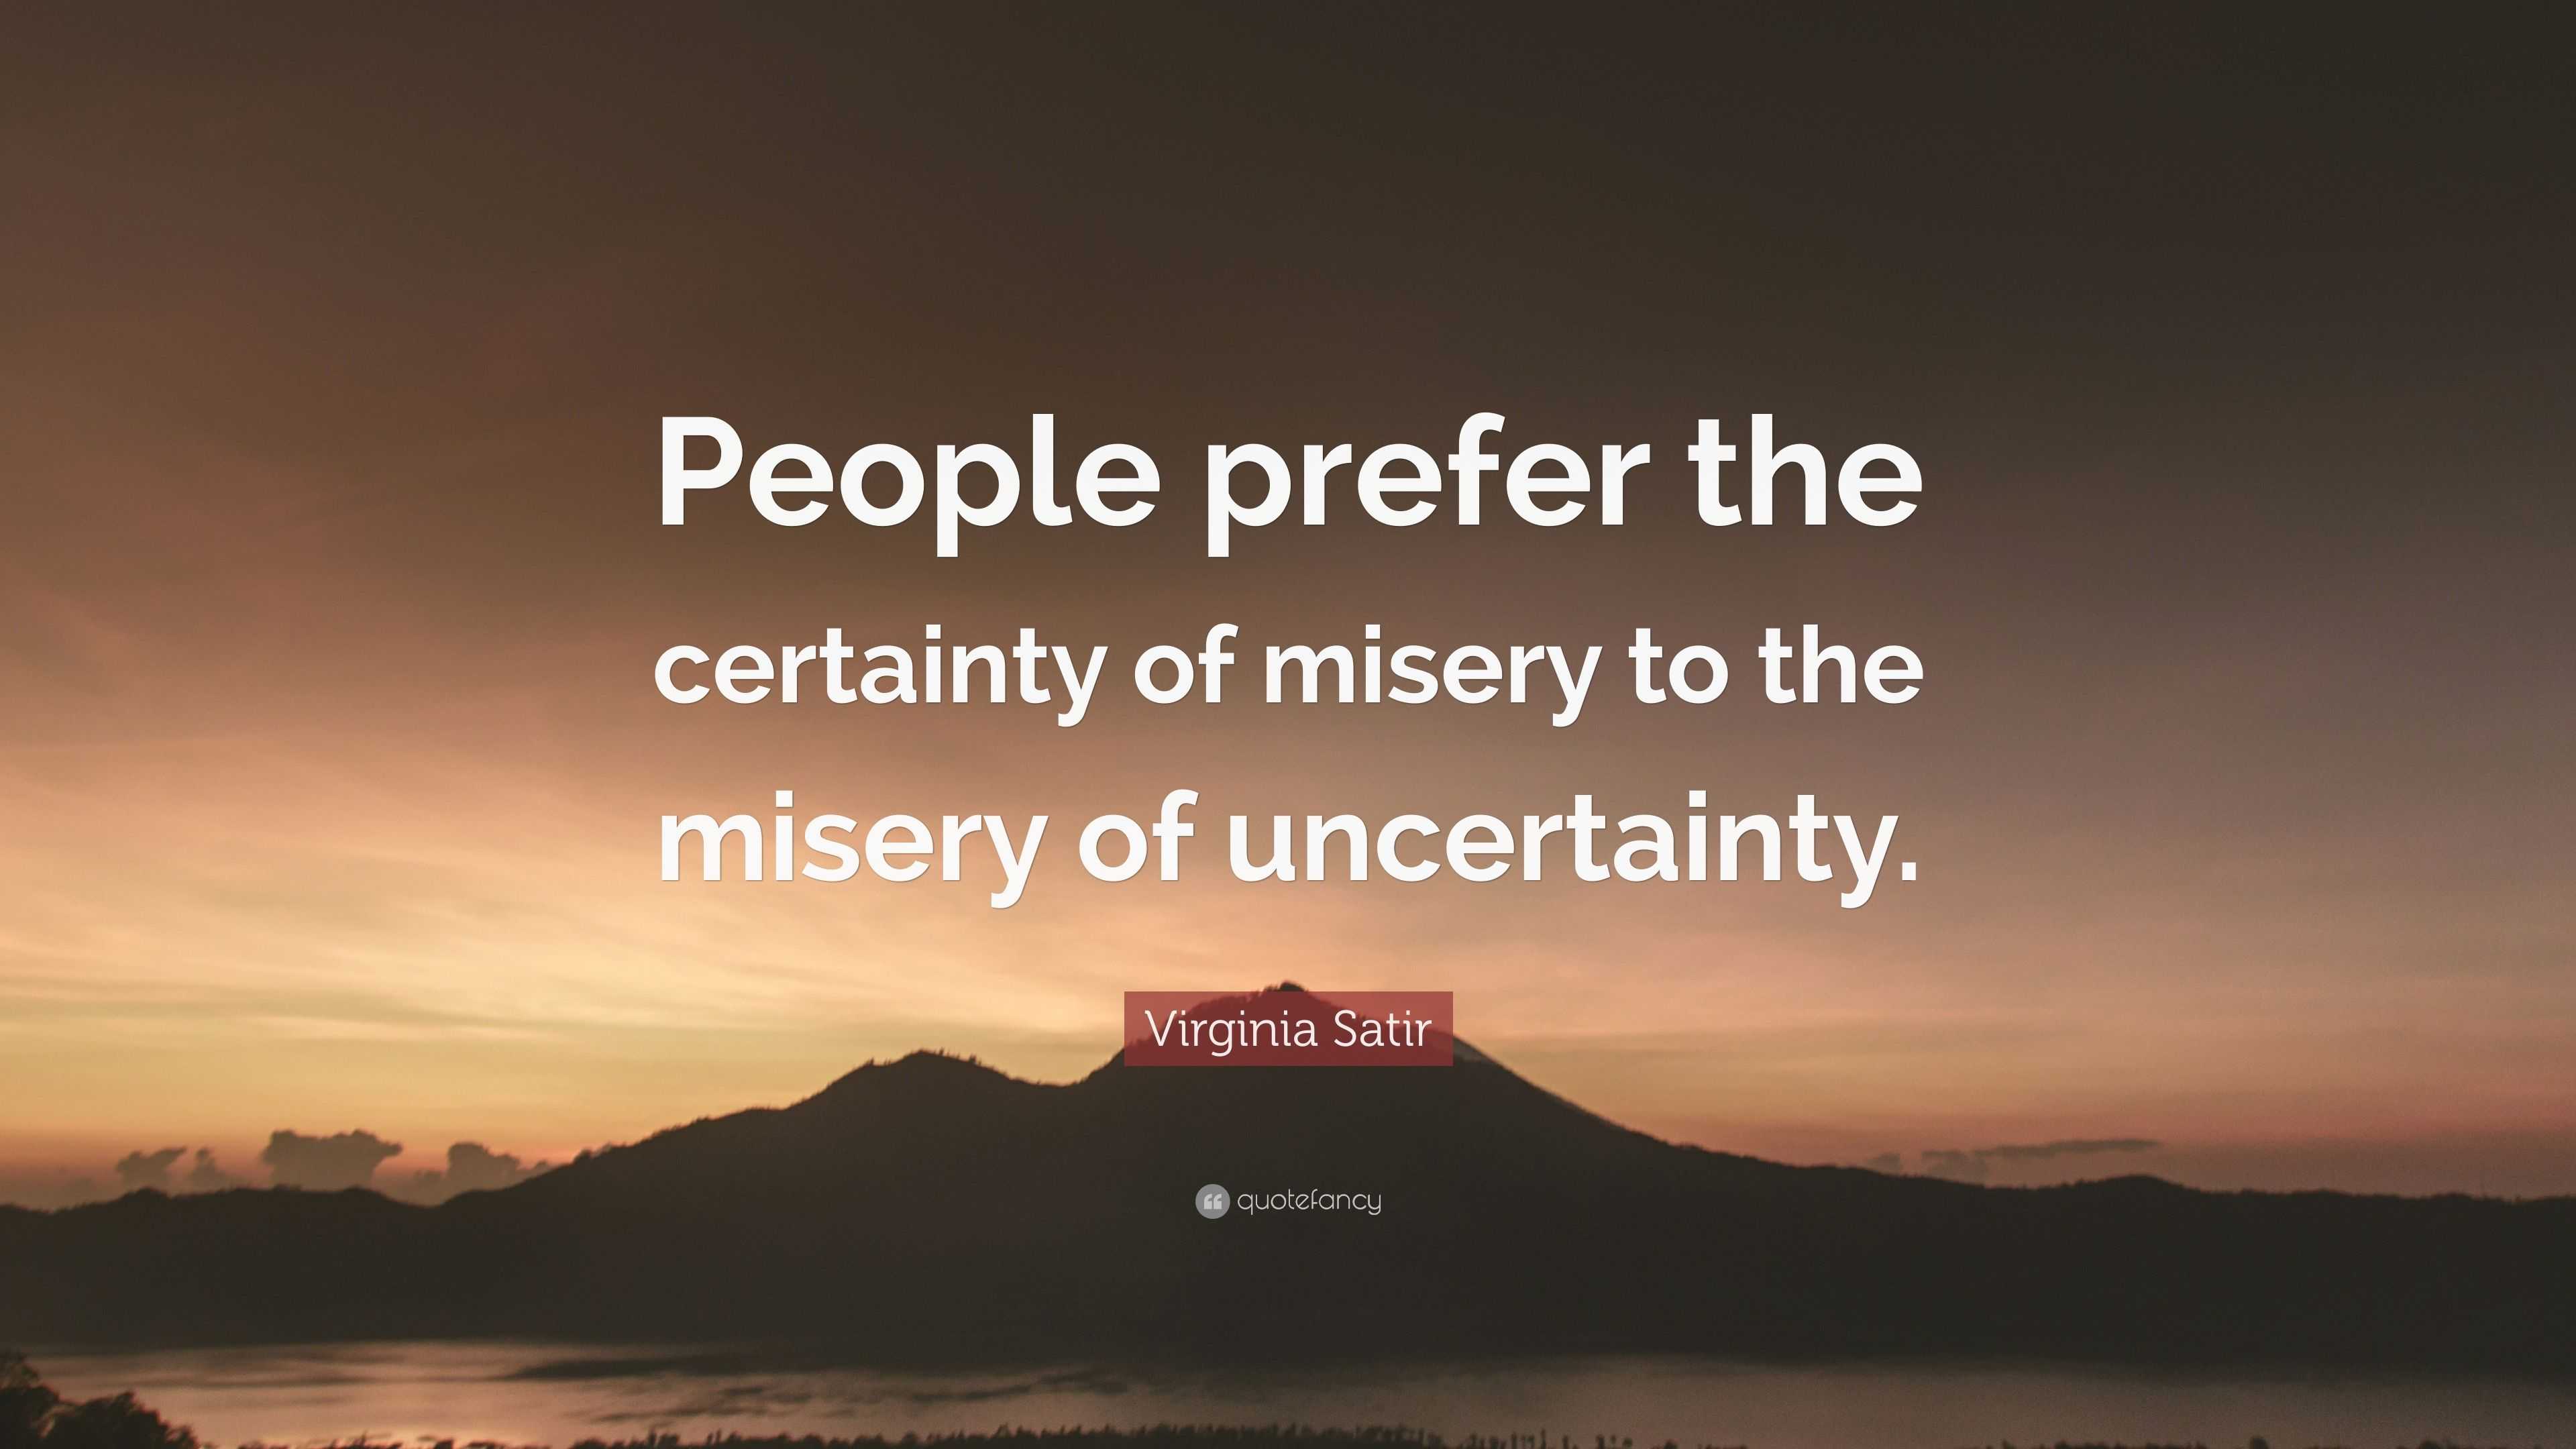 Virginia Satir Quote: “People prefer the certainty of misery to the